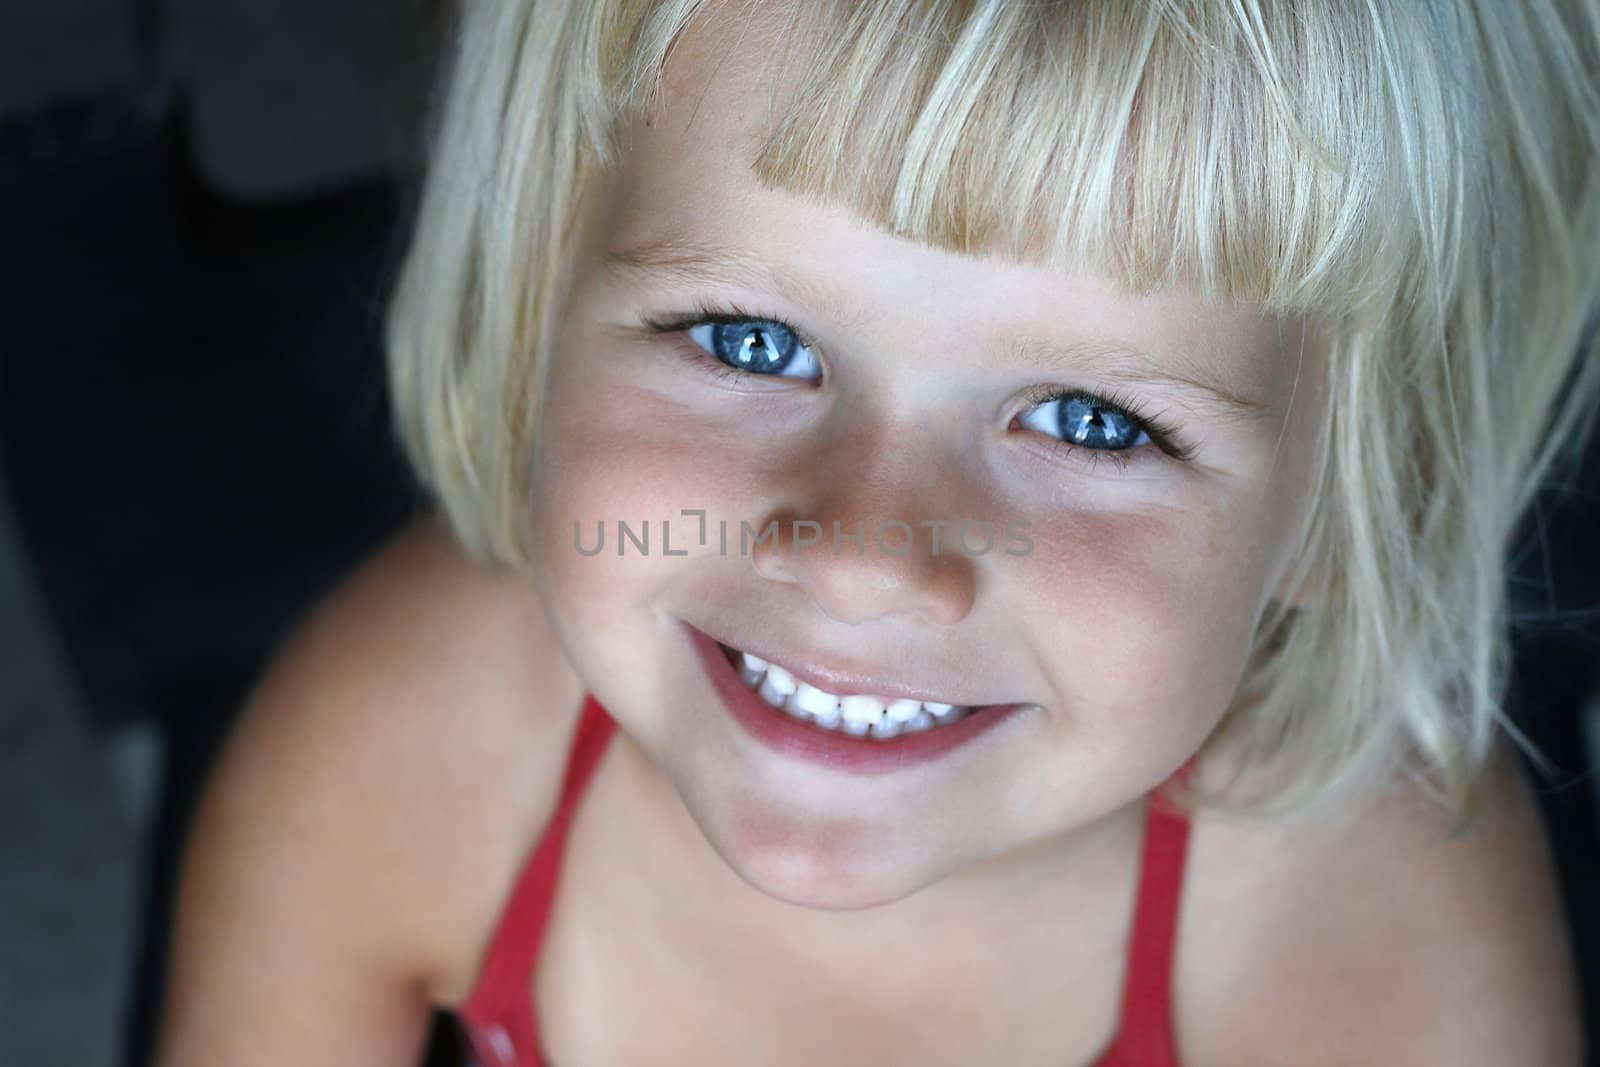 A four year old girl smiling up towards the camera. Horizontal soft image with blurred background